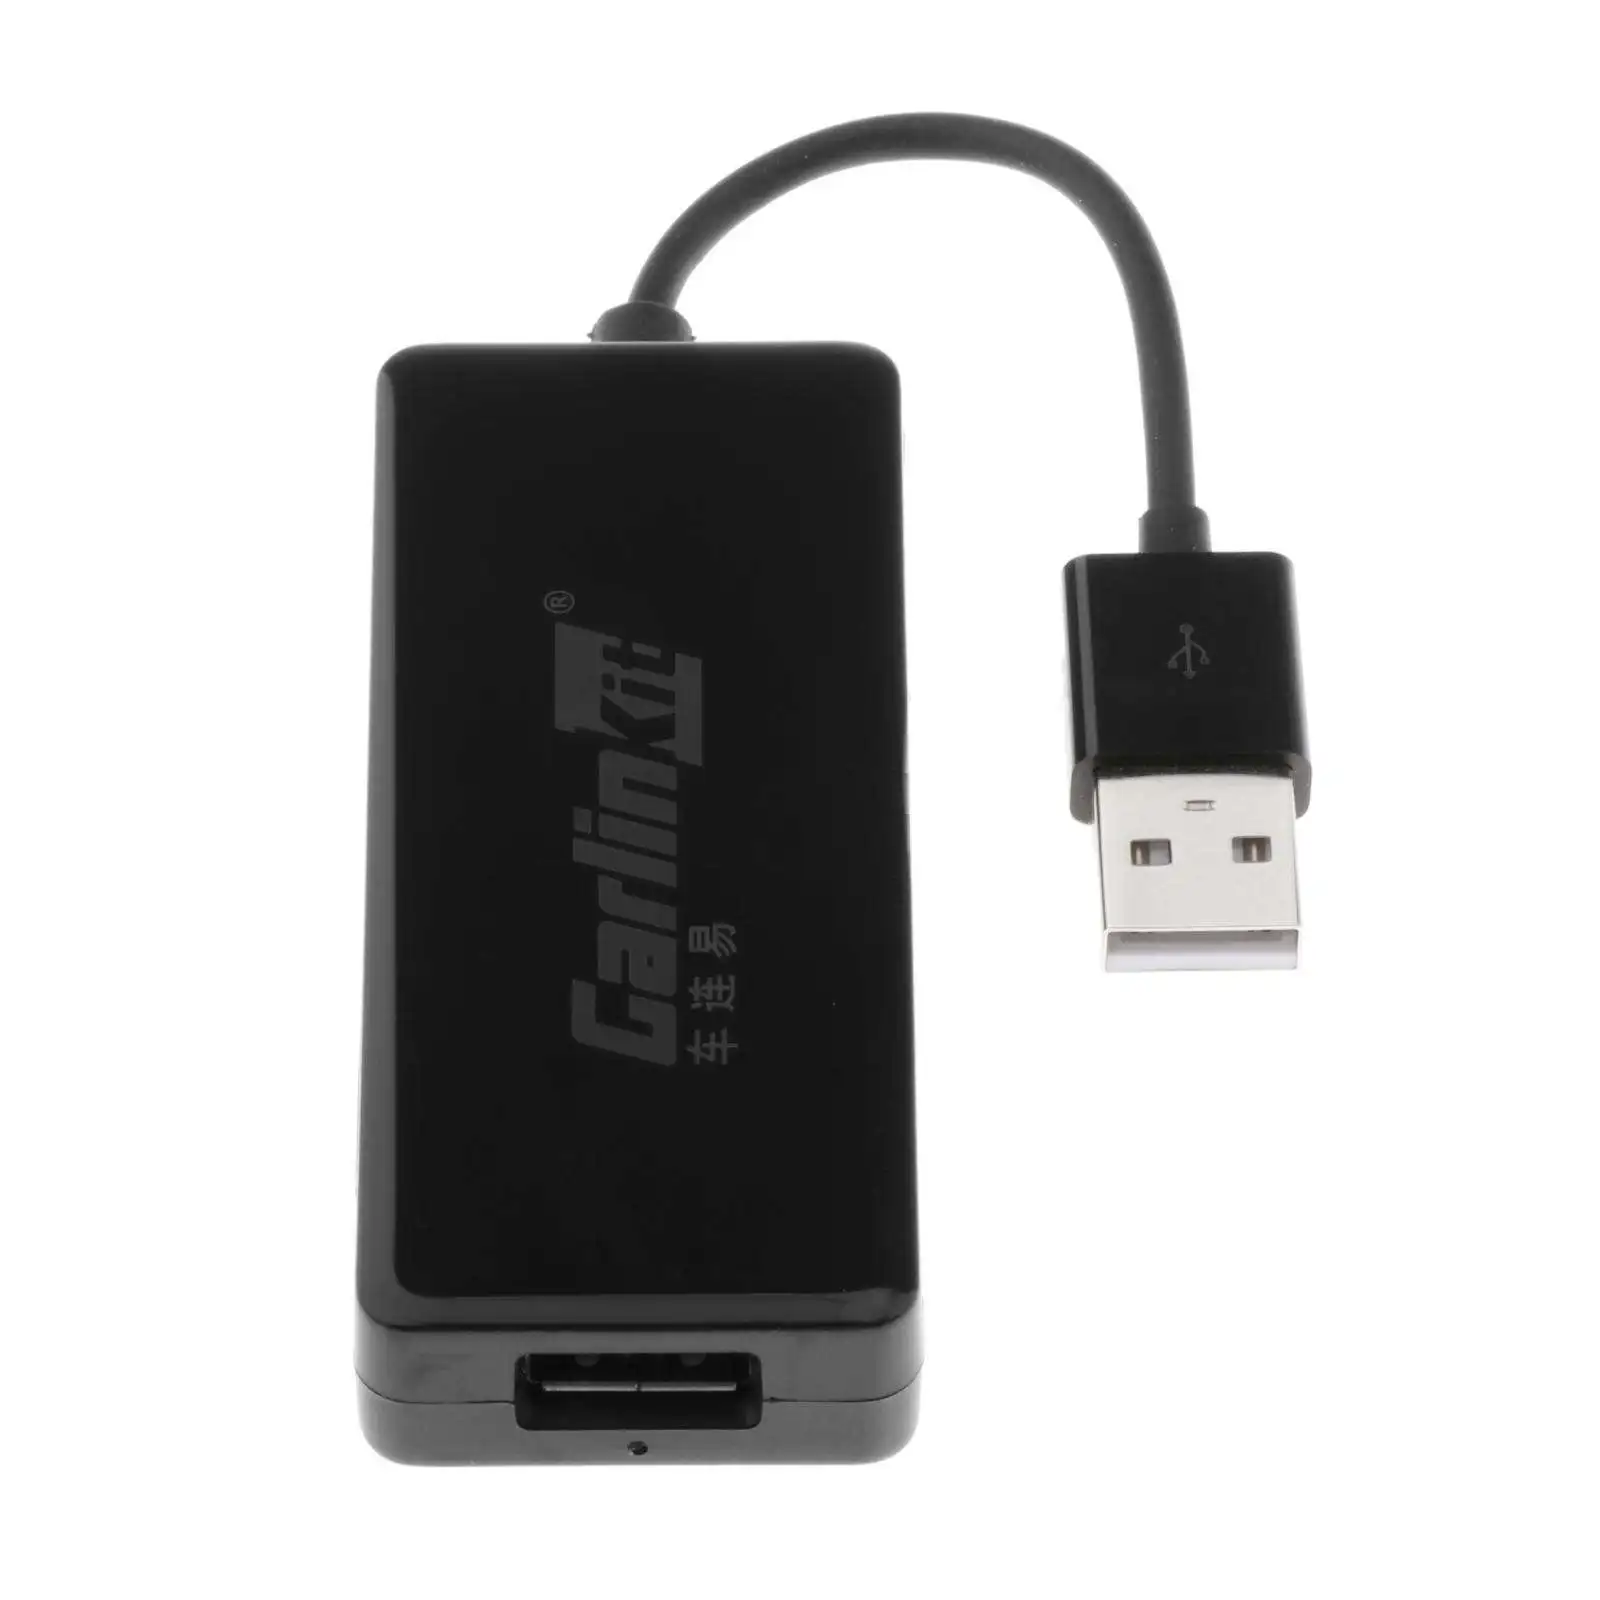  Car Smart Link for  Dongle Adapter for IOS IPhone Android